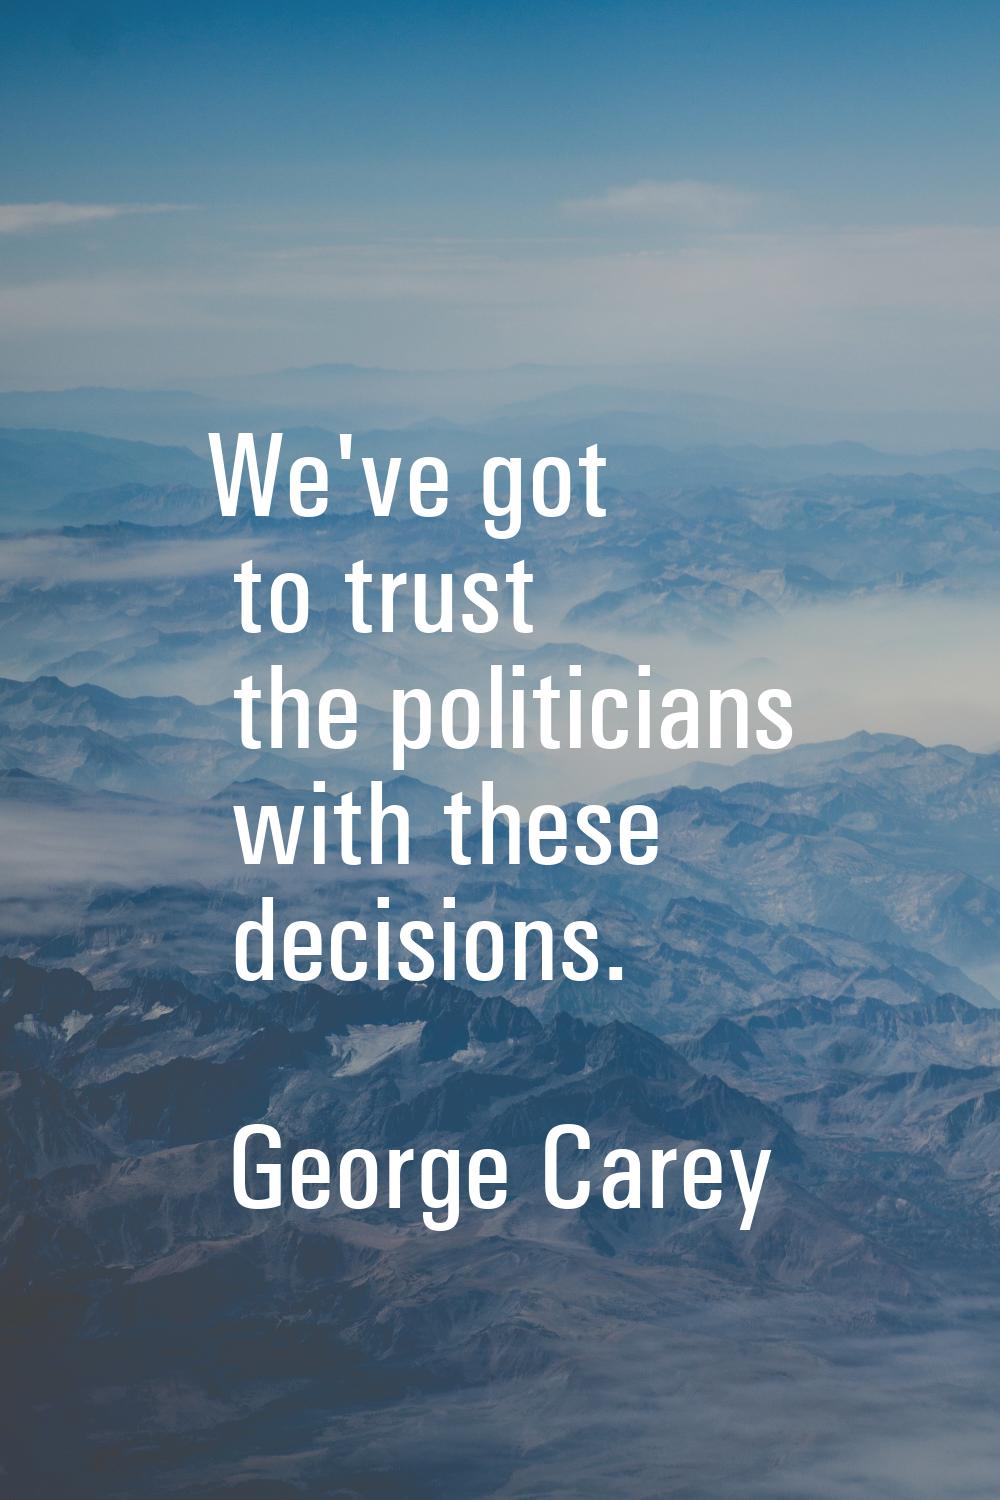 We've got to trust the politicians with these decisions.